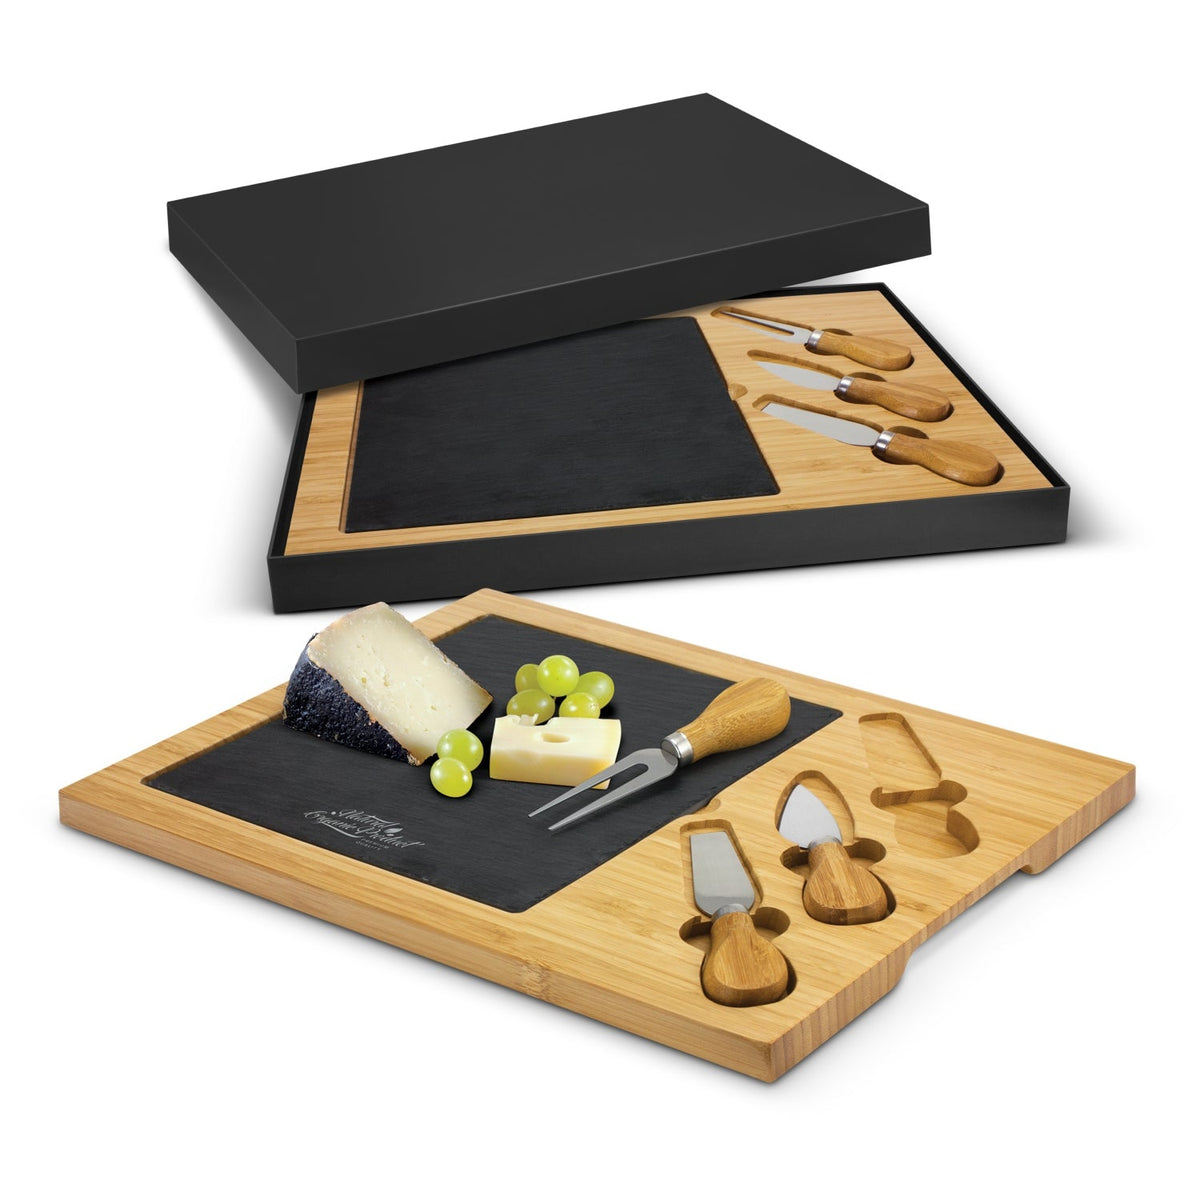 SLATE-BAMBOOK-CHEESE-SERVING-BOARD-115959-CLEINT-STAFF-CHRISTMAS-GIFT